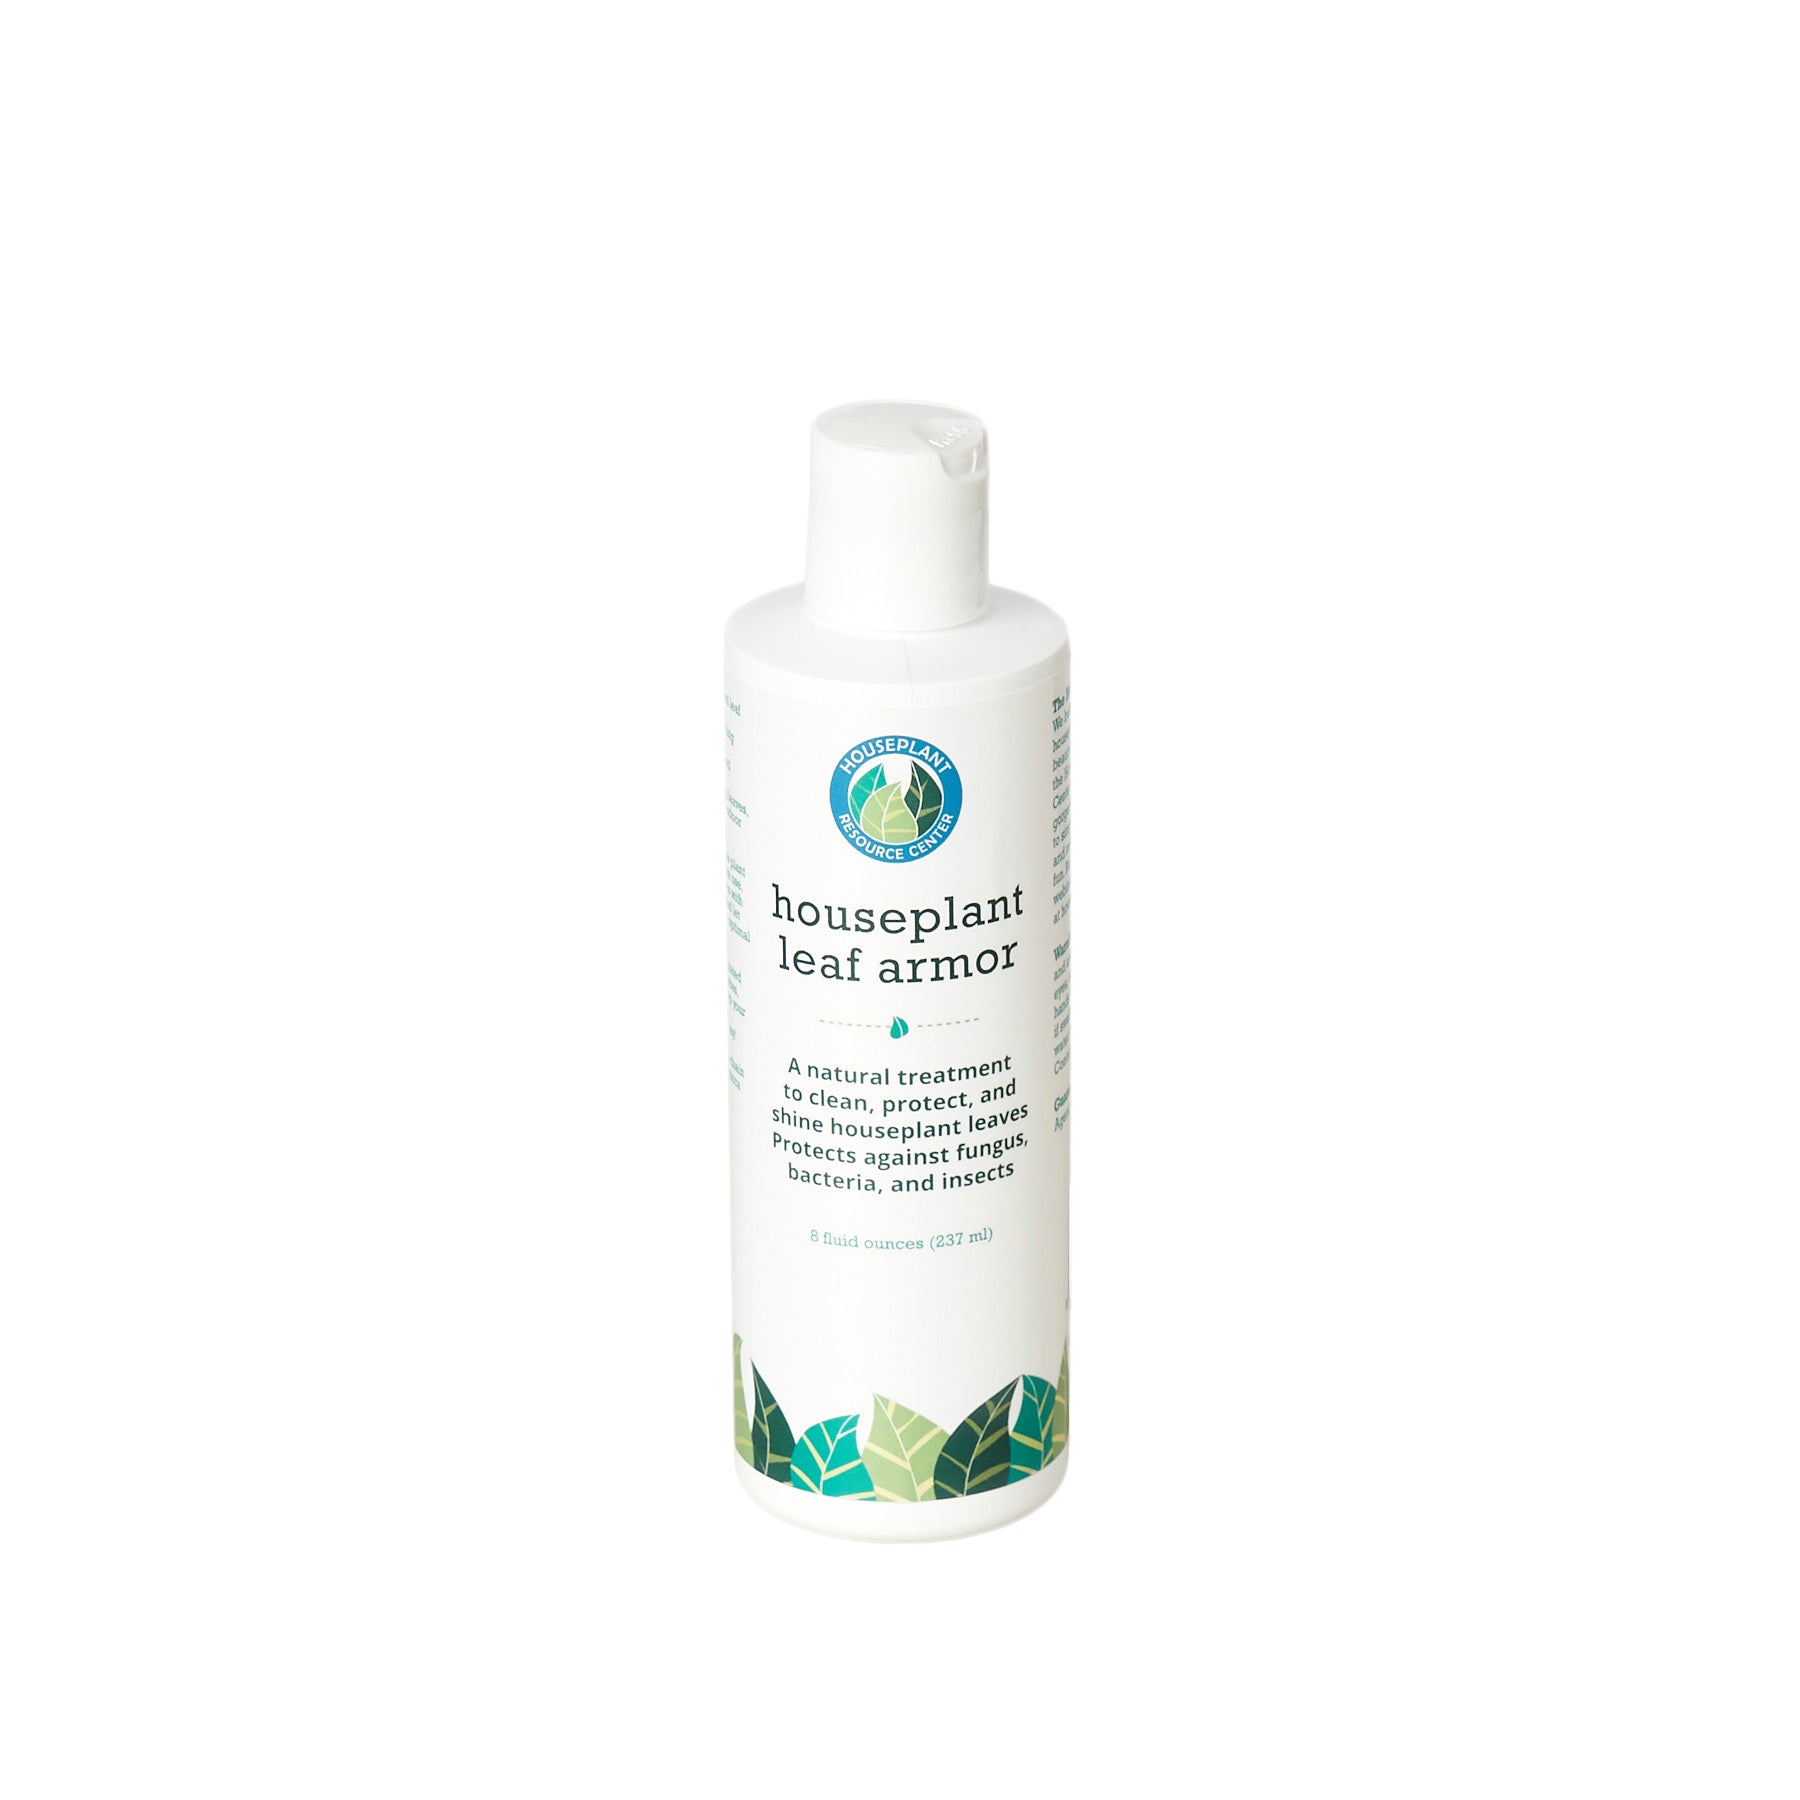 A refreshing bottle of body wash adorned with green leaves on a clean white background.